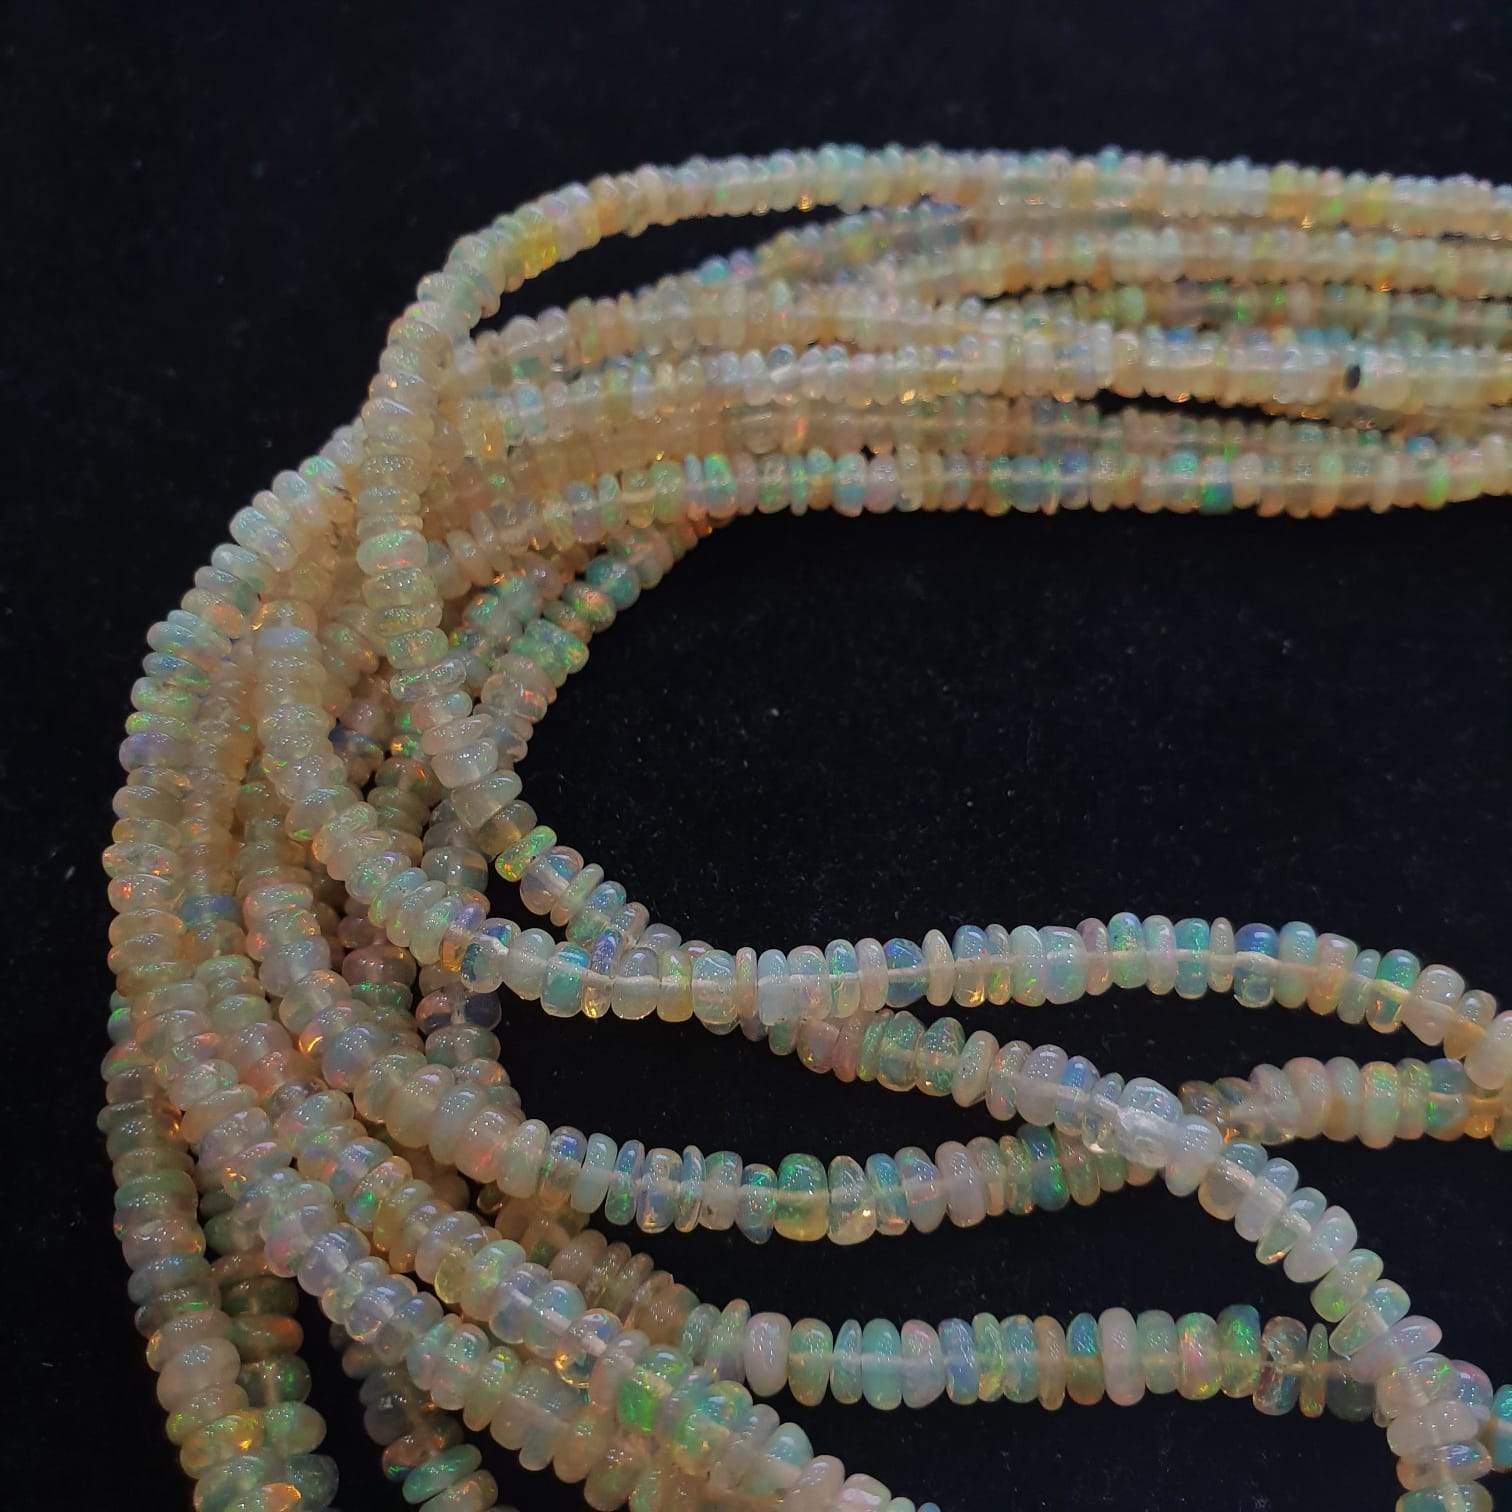 Brown Base  Opal Beads 17 Inches 2-5mm Graduated Beads UNTREATED - The LabradoriteKing